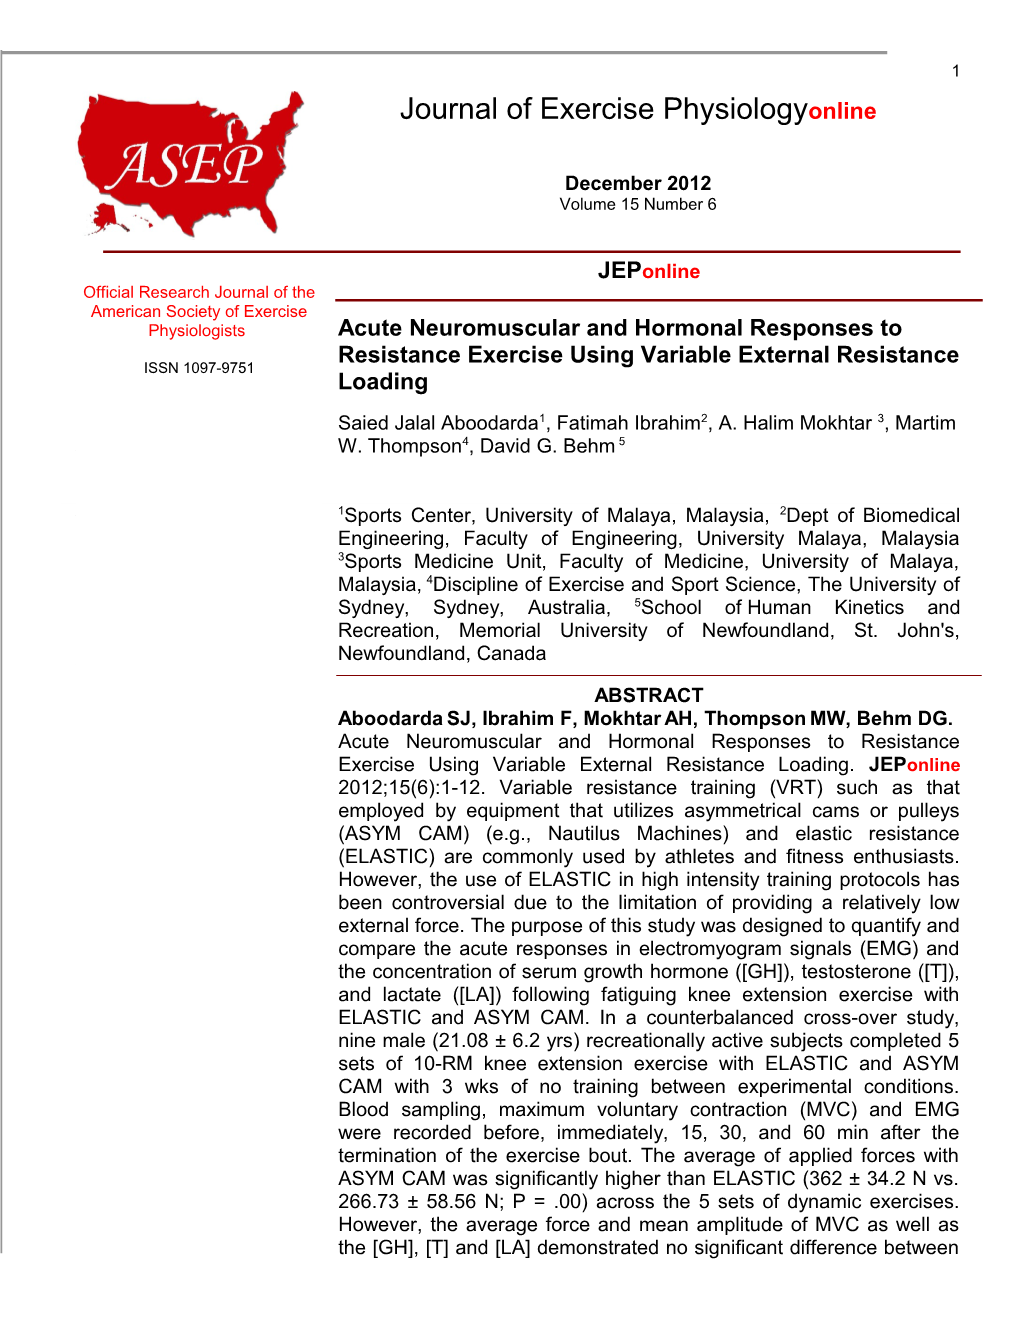 Acute Neuromuscular and Hormonal Responses to Resistance Exercise Using Variable External